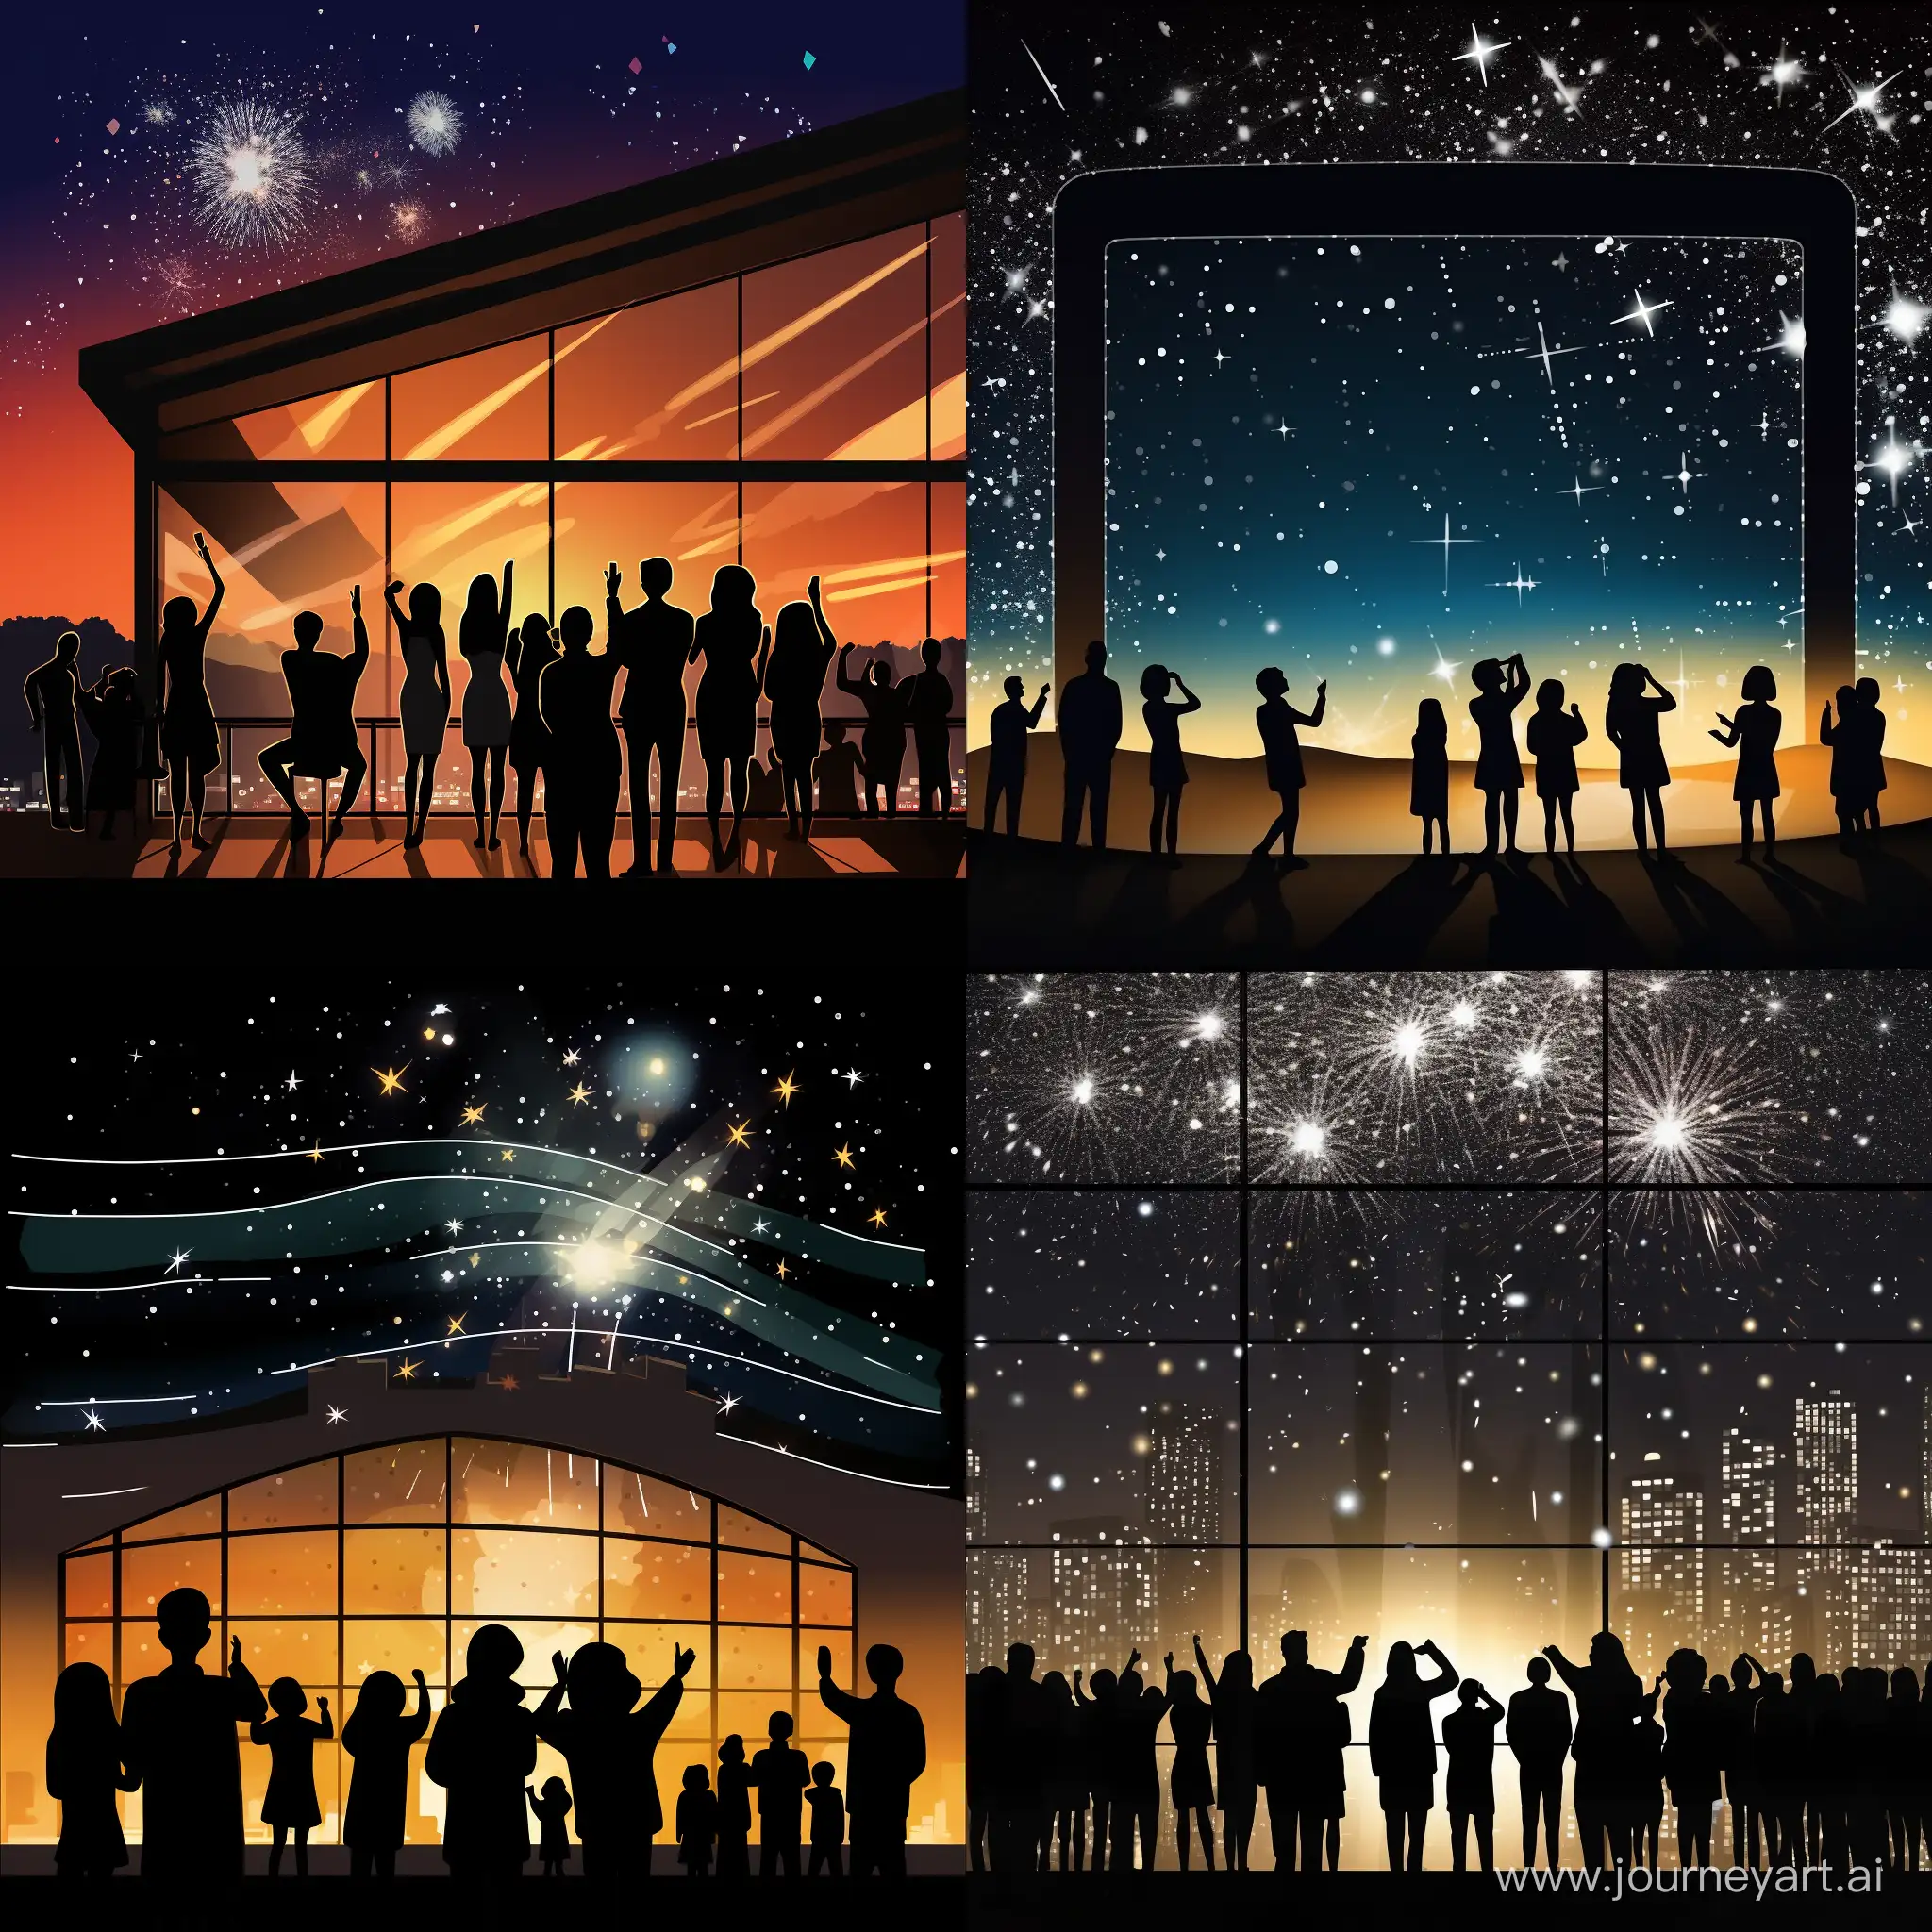 cartoon scene frame of New Year’s Eve night, with people looking to the sky watching a drawn made with lights in the sky with just the shape of a building, inspired by modern architect Oscar Niemeyer, in cartoon style